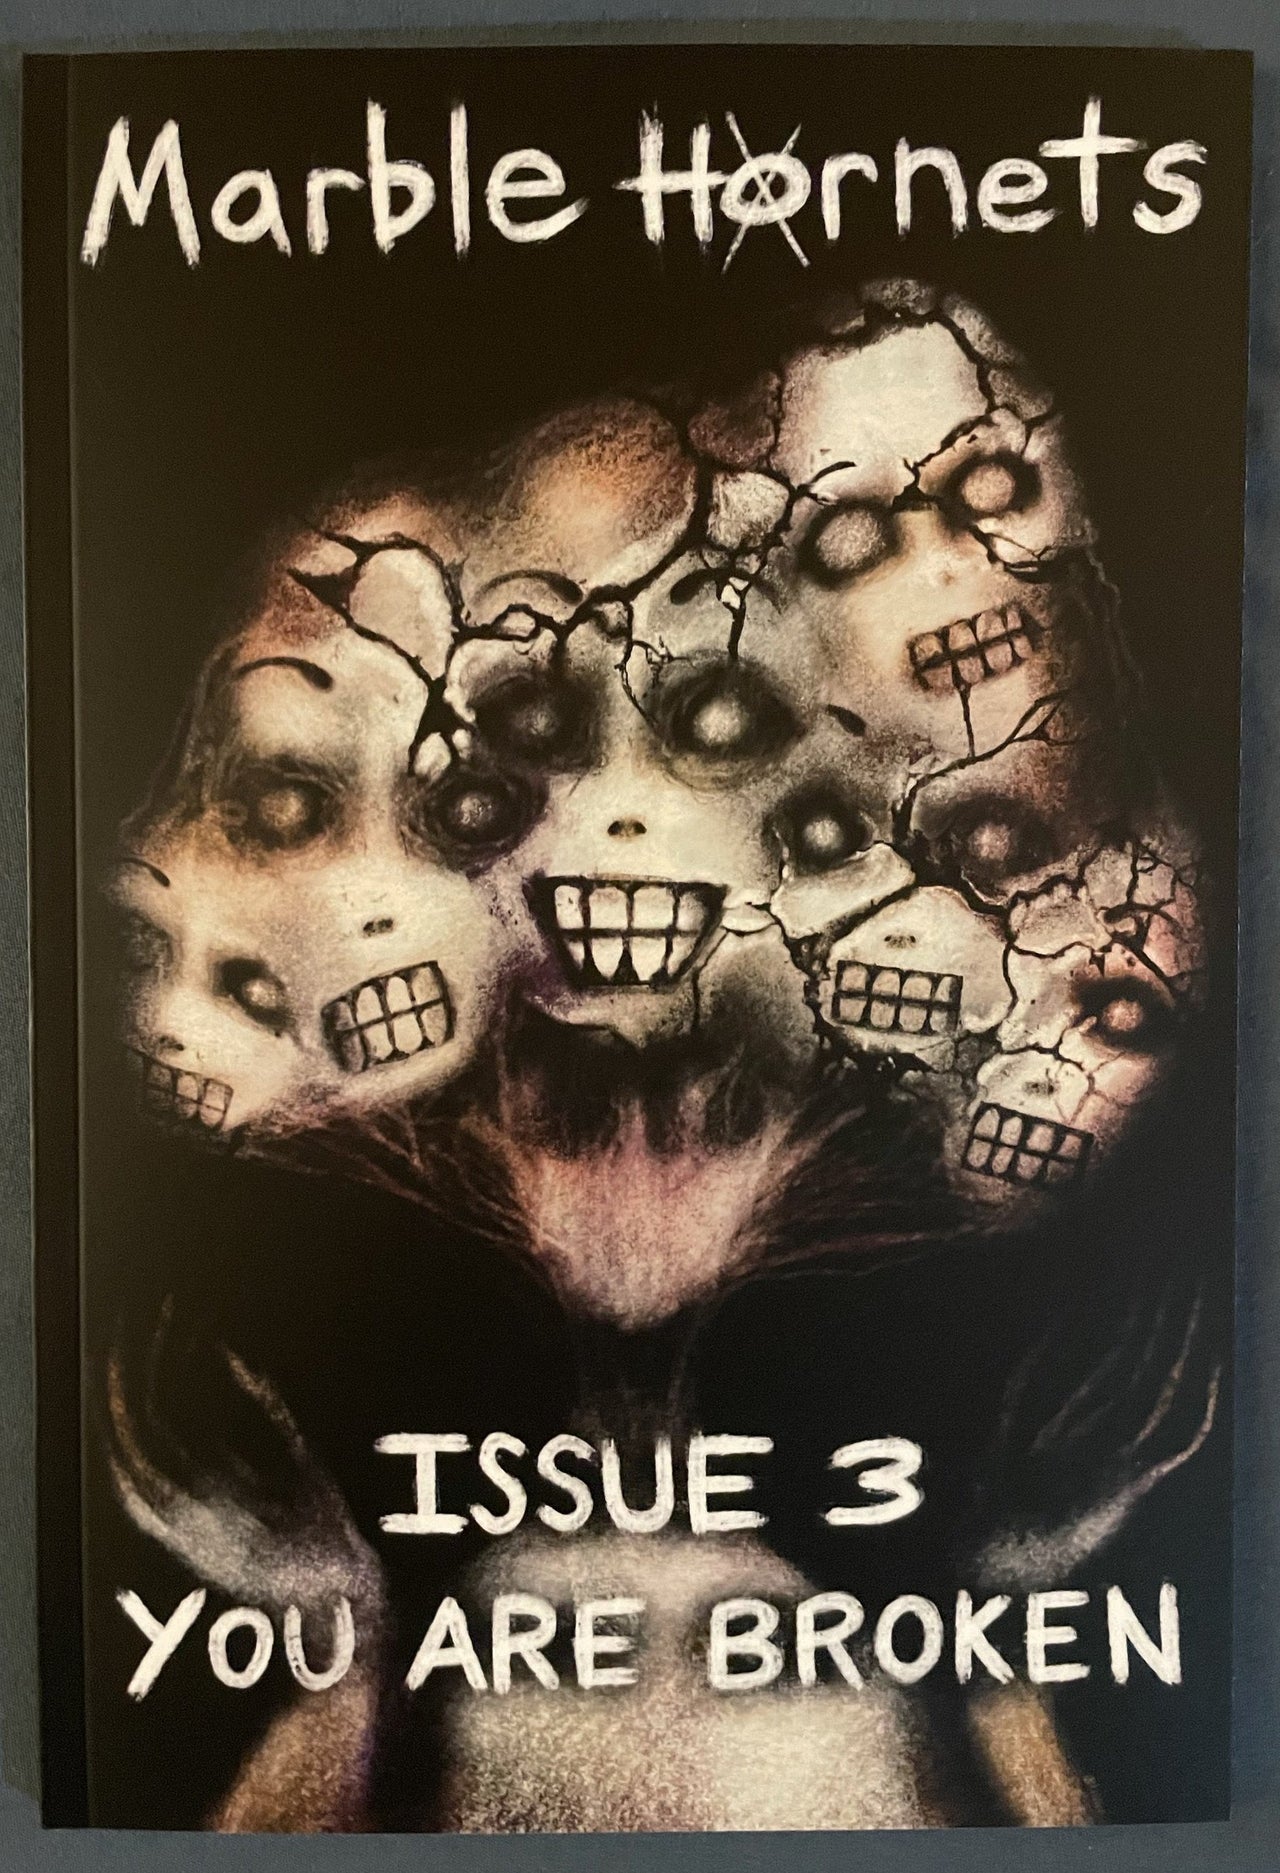 Print Edition - Marble Hornets Issue 3: You Are Broken